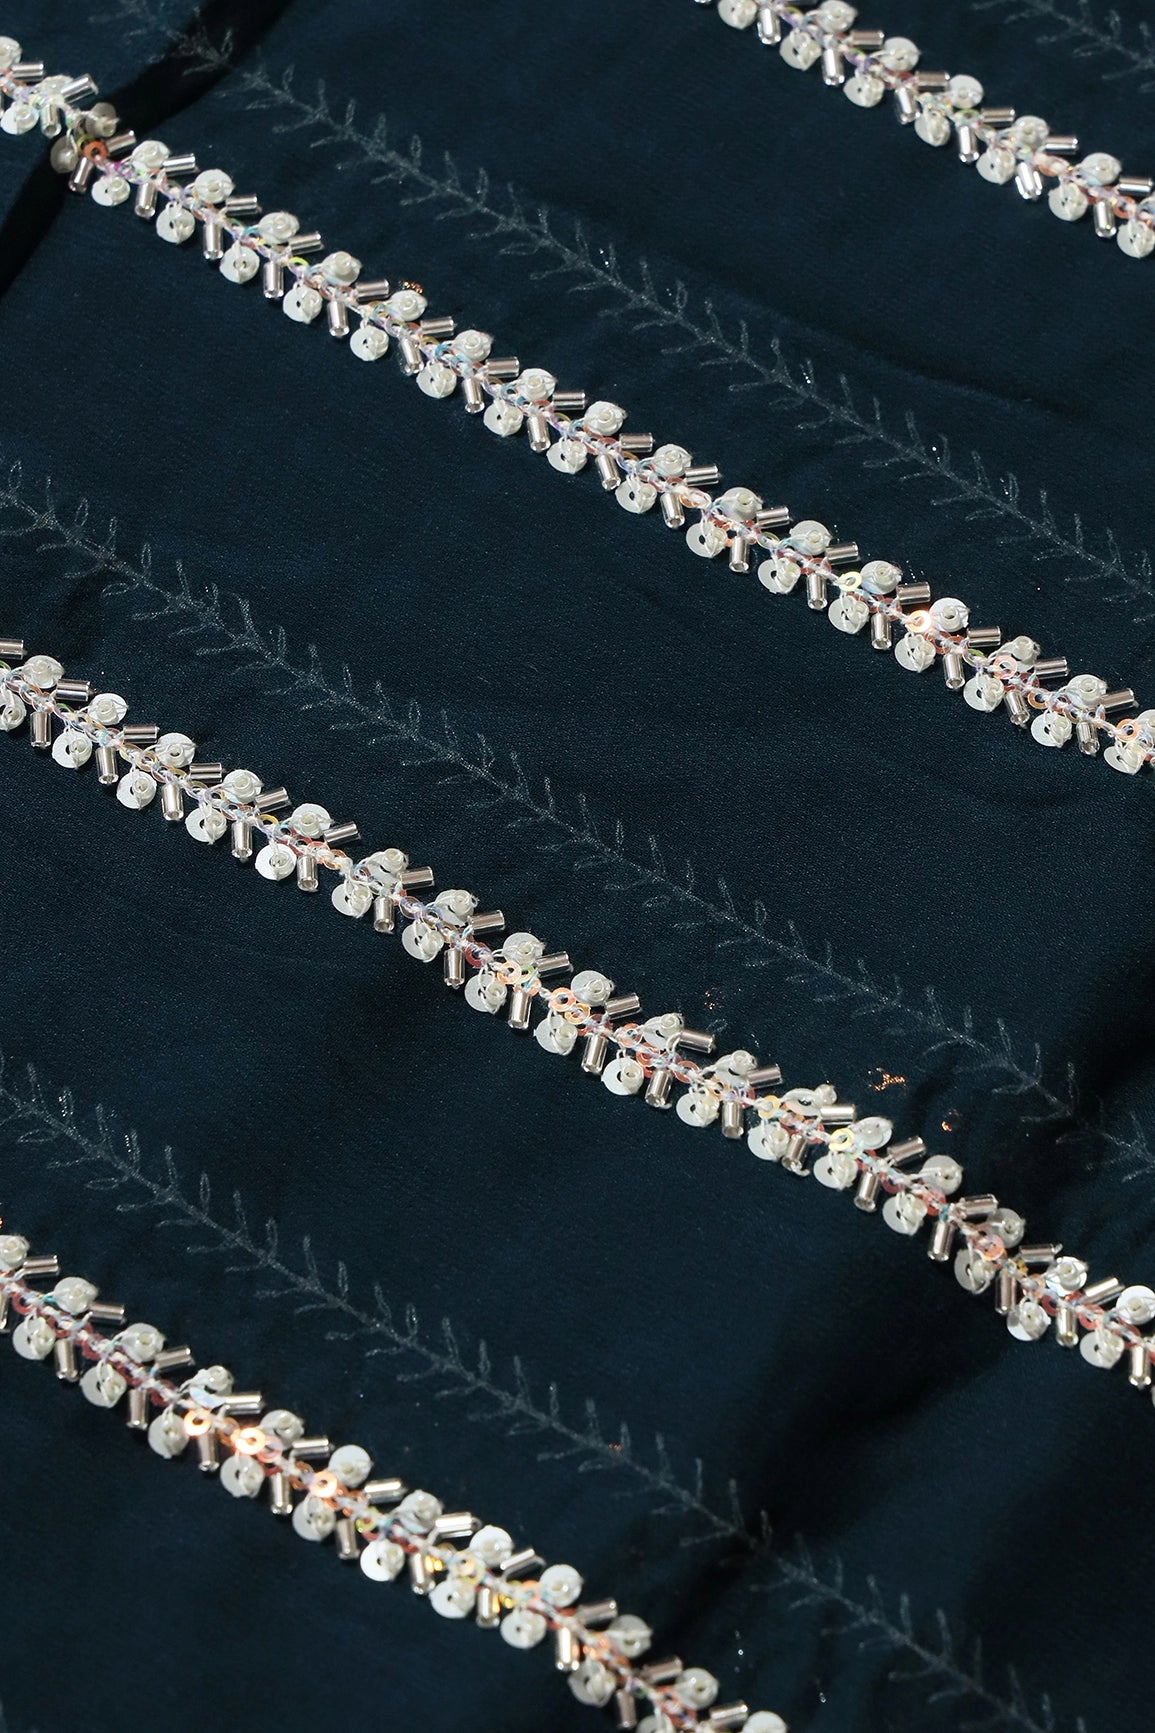 Silver Beads With Sequins Beautiful Stripes Handwork Embroidery On Prussian Blue Viscose Georgette Fabric